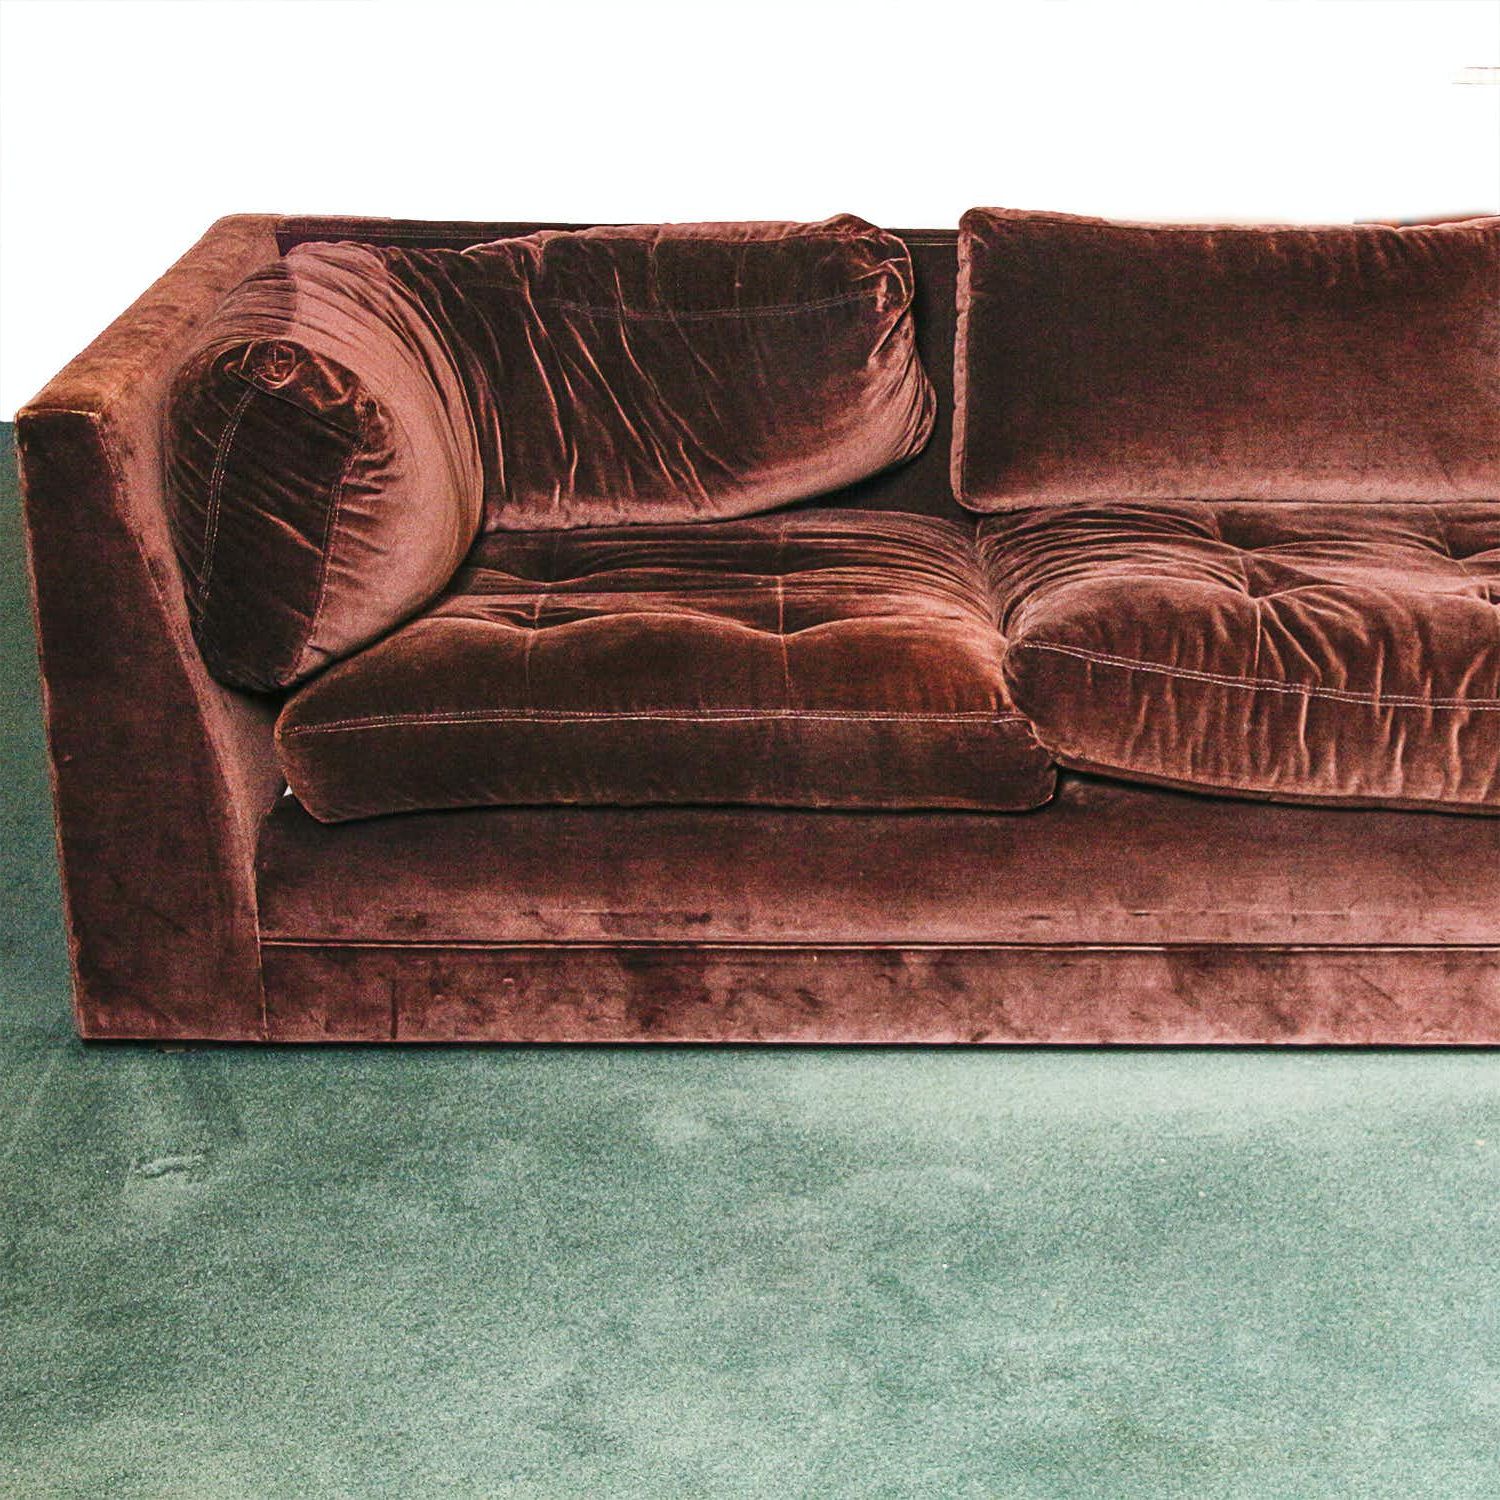 Chocolate Brown Velvet Upholstered Sectional Sofa : Ebth Regarding Sofas In Chocolate Brown (Gallery 9 of 20)